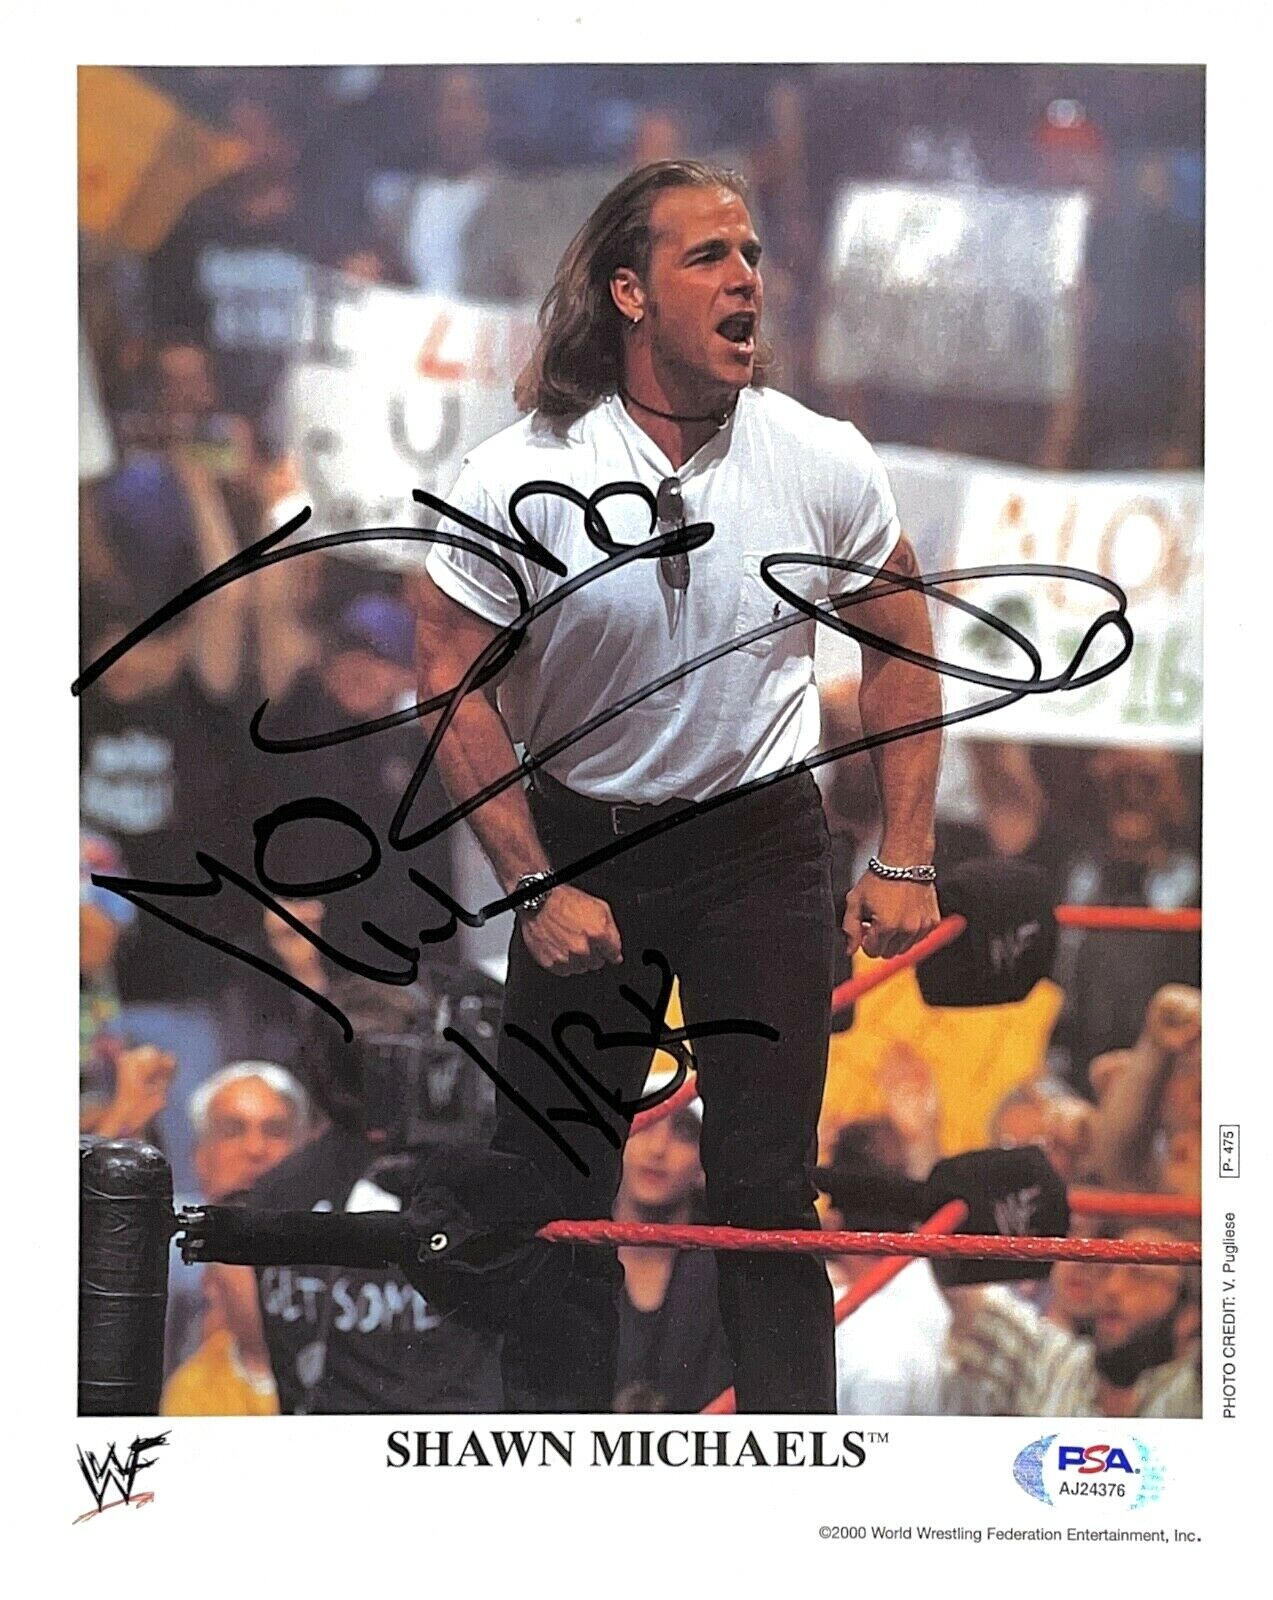 WWE SHAWN MICHAELS P-475 HAND SIGNED AUTOGRAPHED 8X10 PROMO Photo Poster painting WITH PSA COA